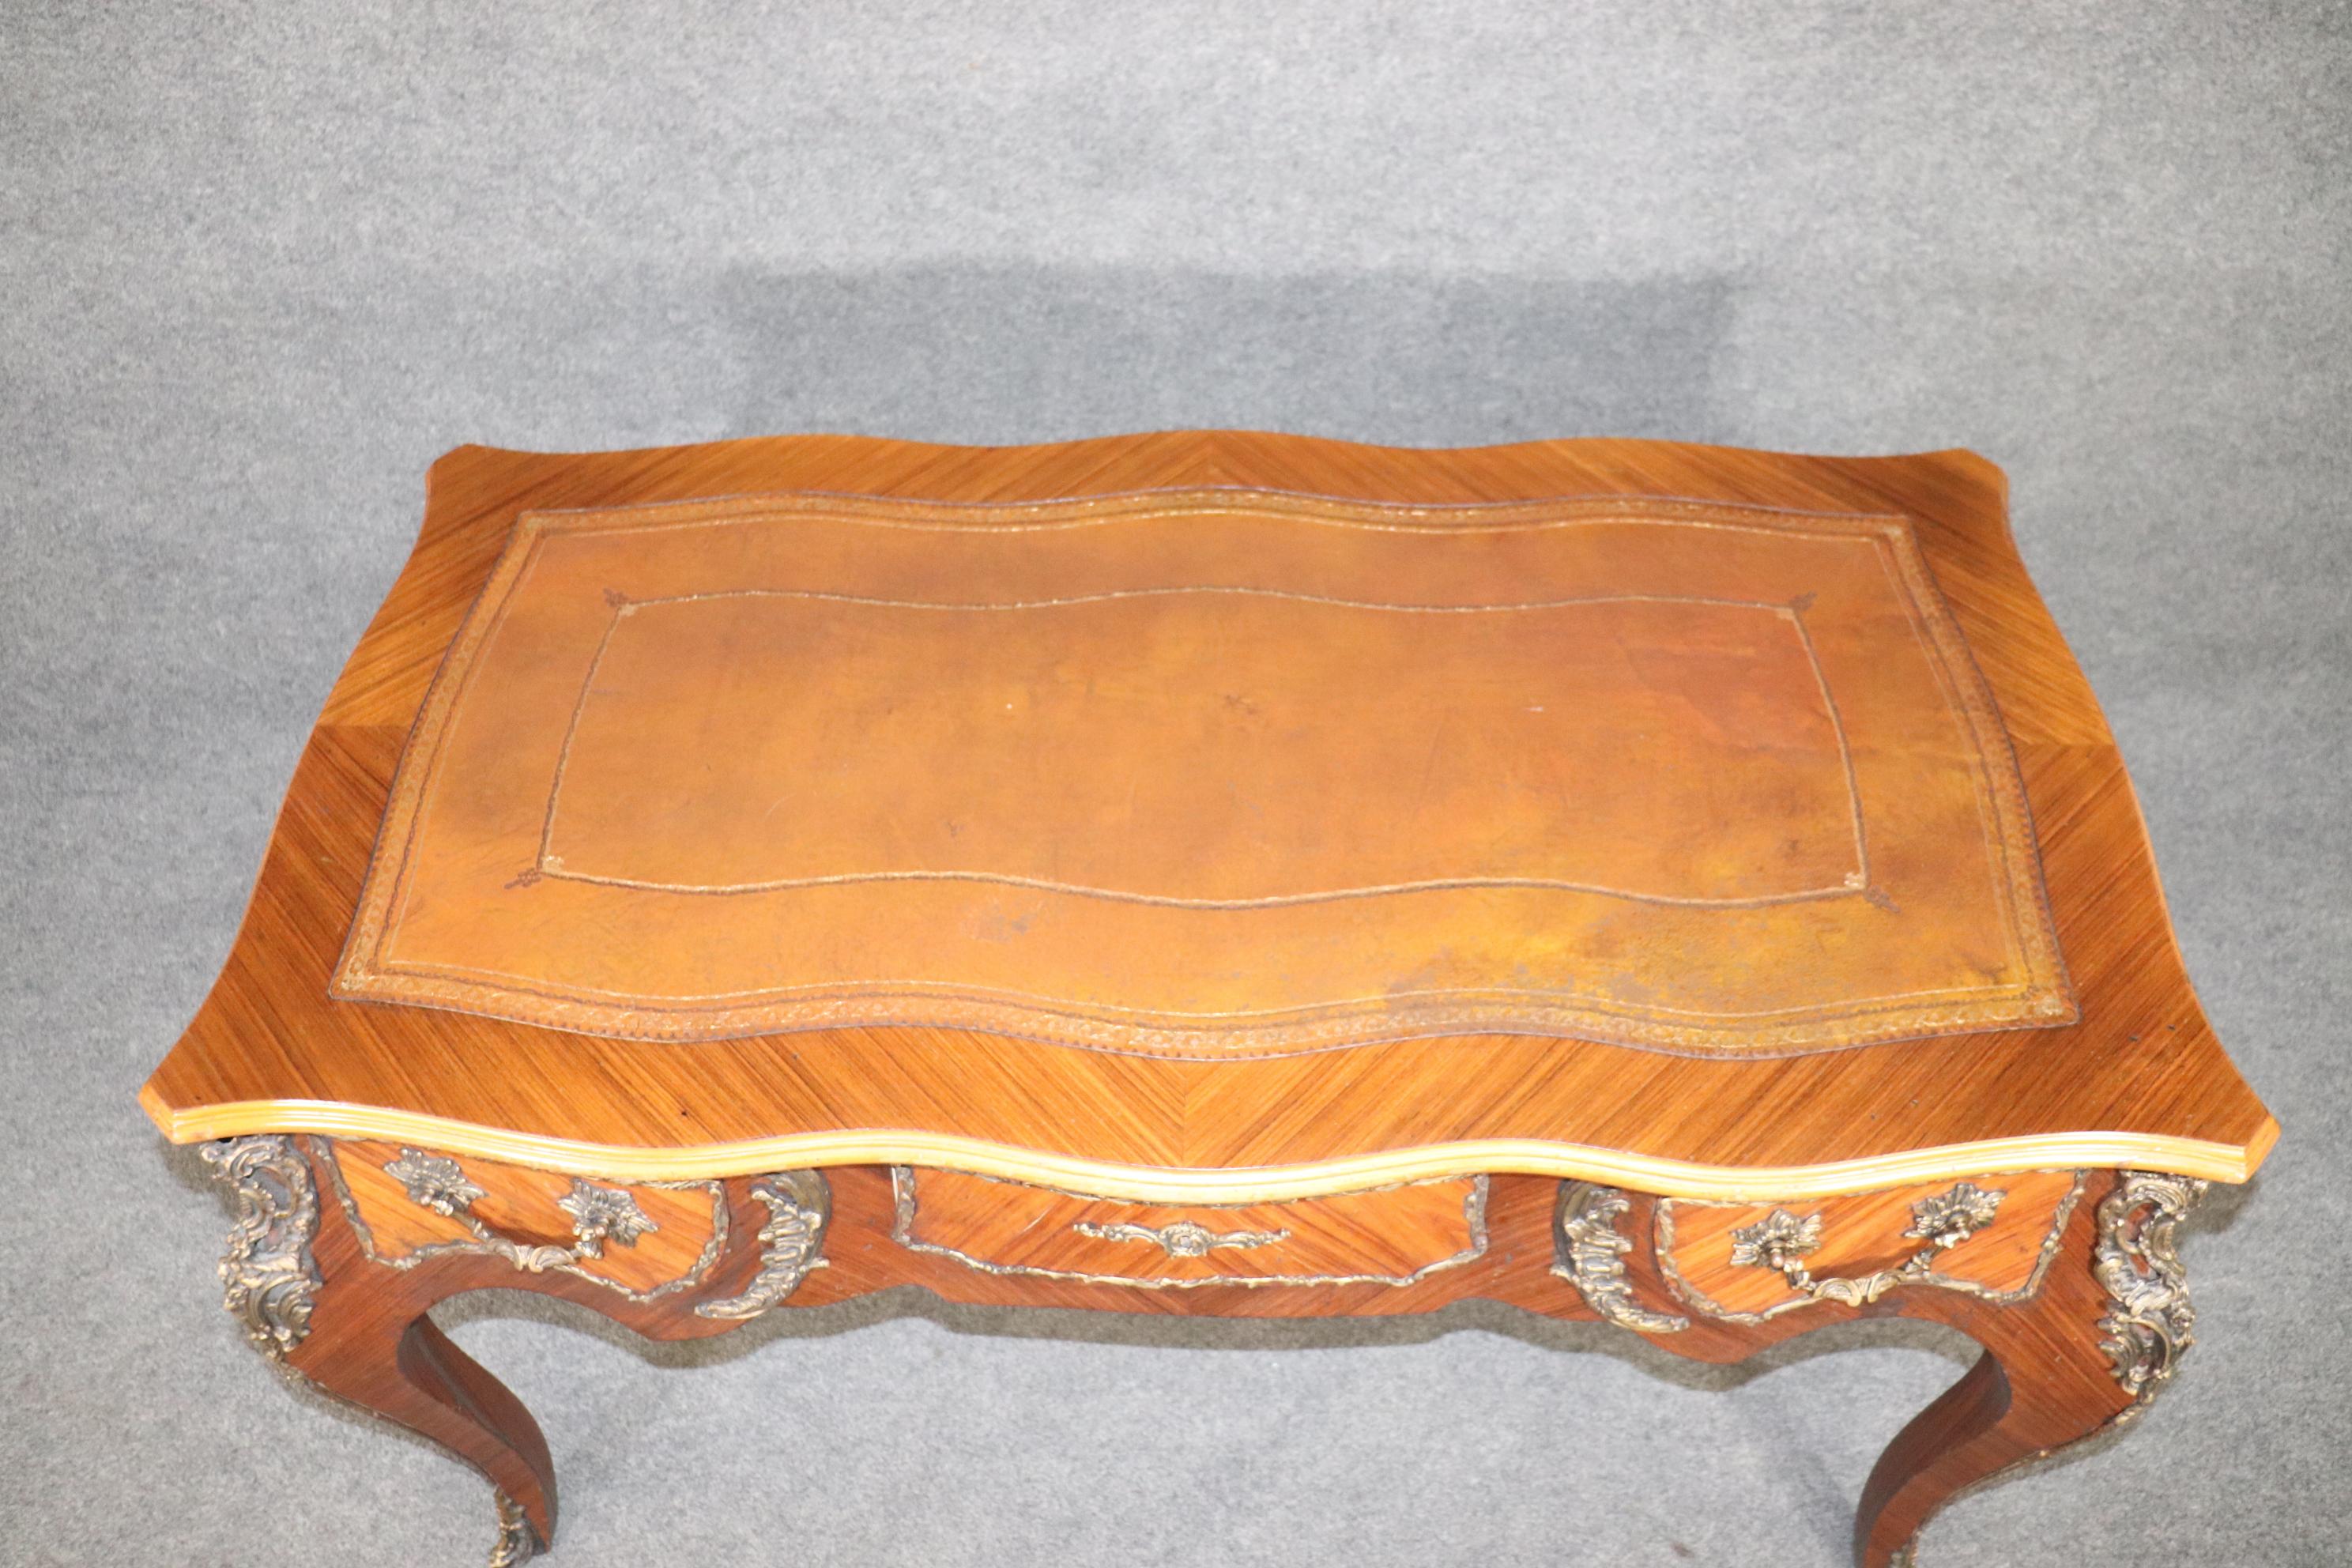 This French Louis XV style leather top desk with brass accents is made of the highest quality and really separates itself from other desks with its attention to detail and elaborate floral decorations on the brass castings. This piece is equipped